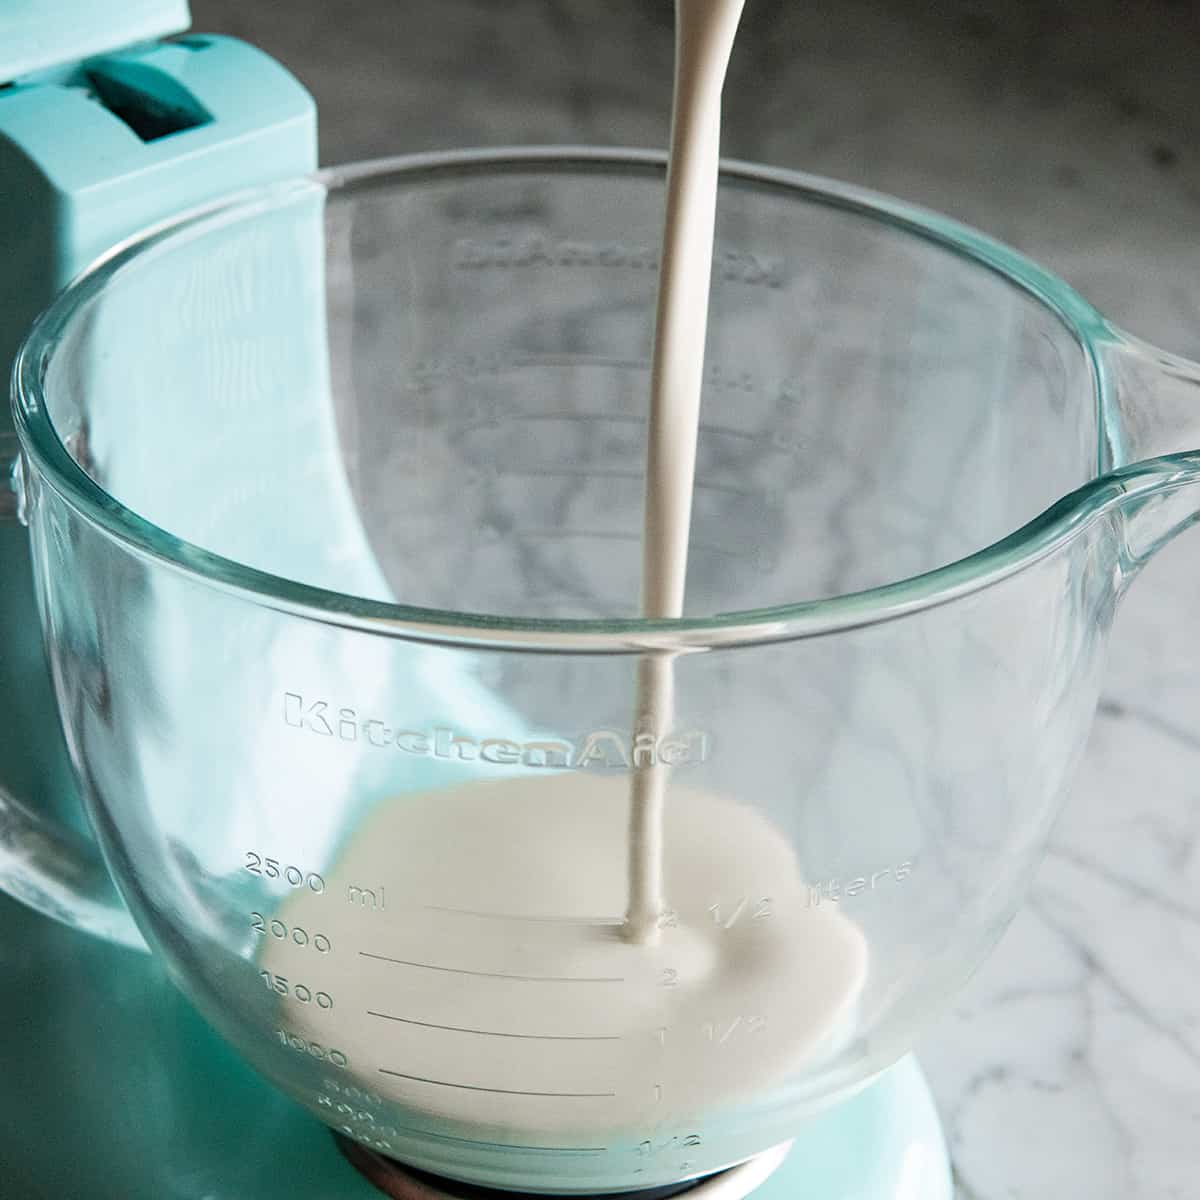 How to Make Whipped Cream - pouring heaving cream into a mixing bowl